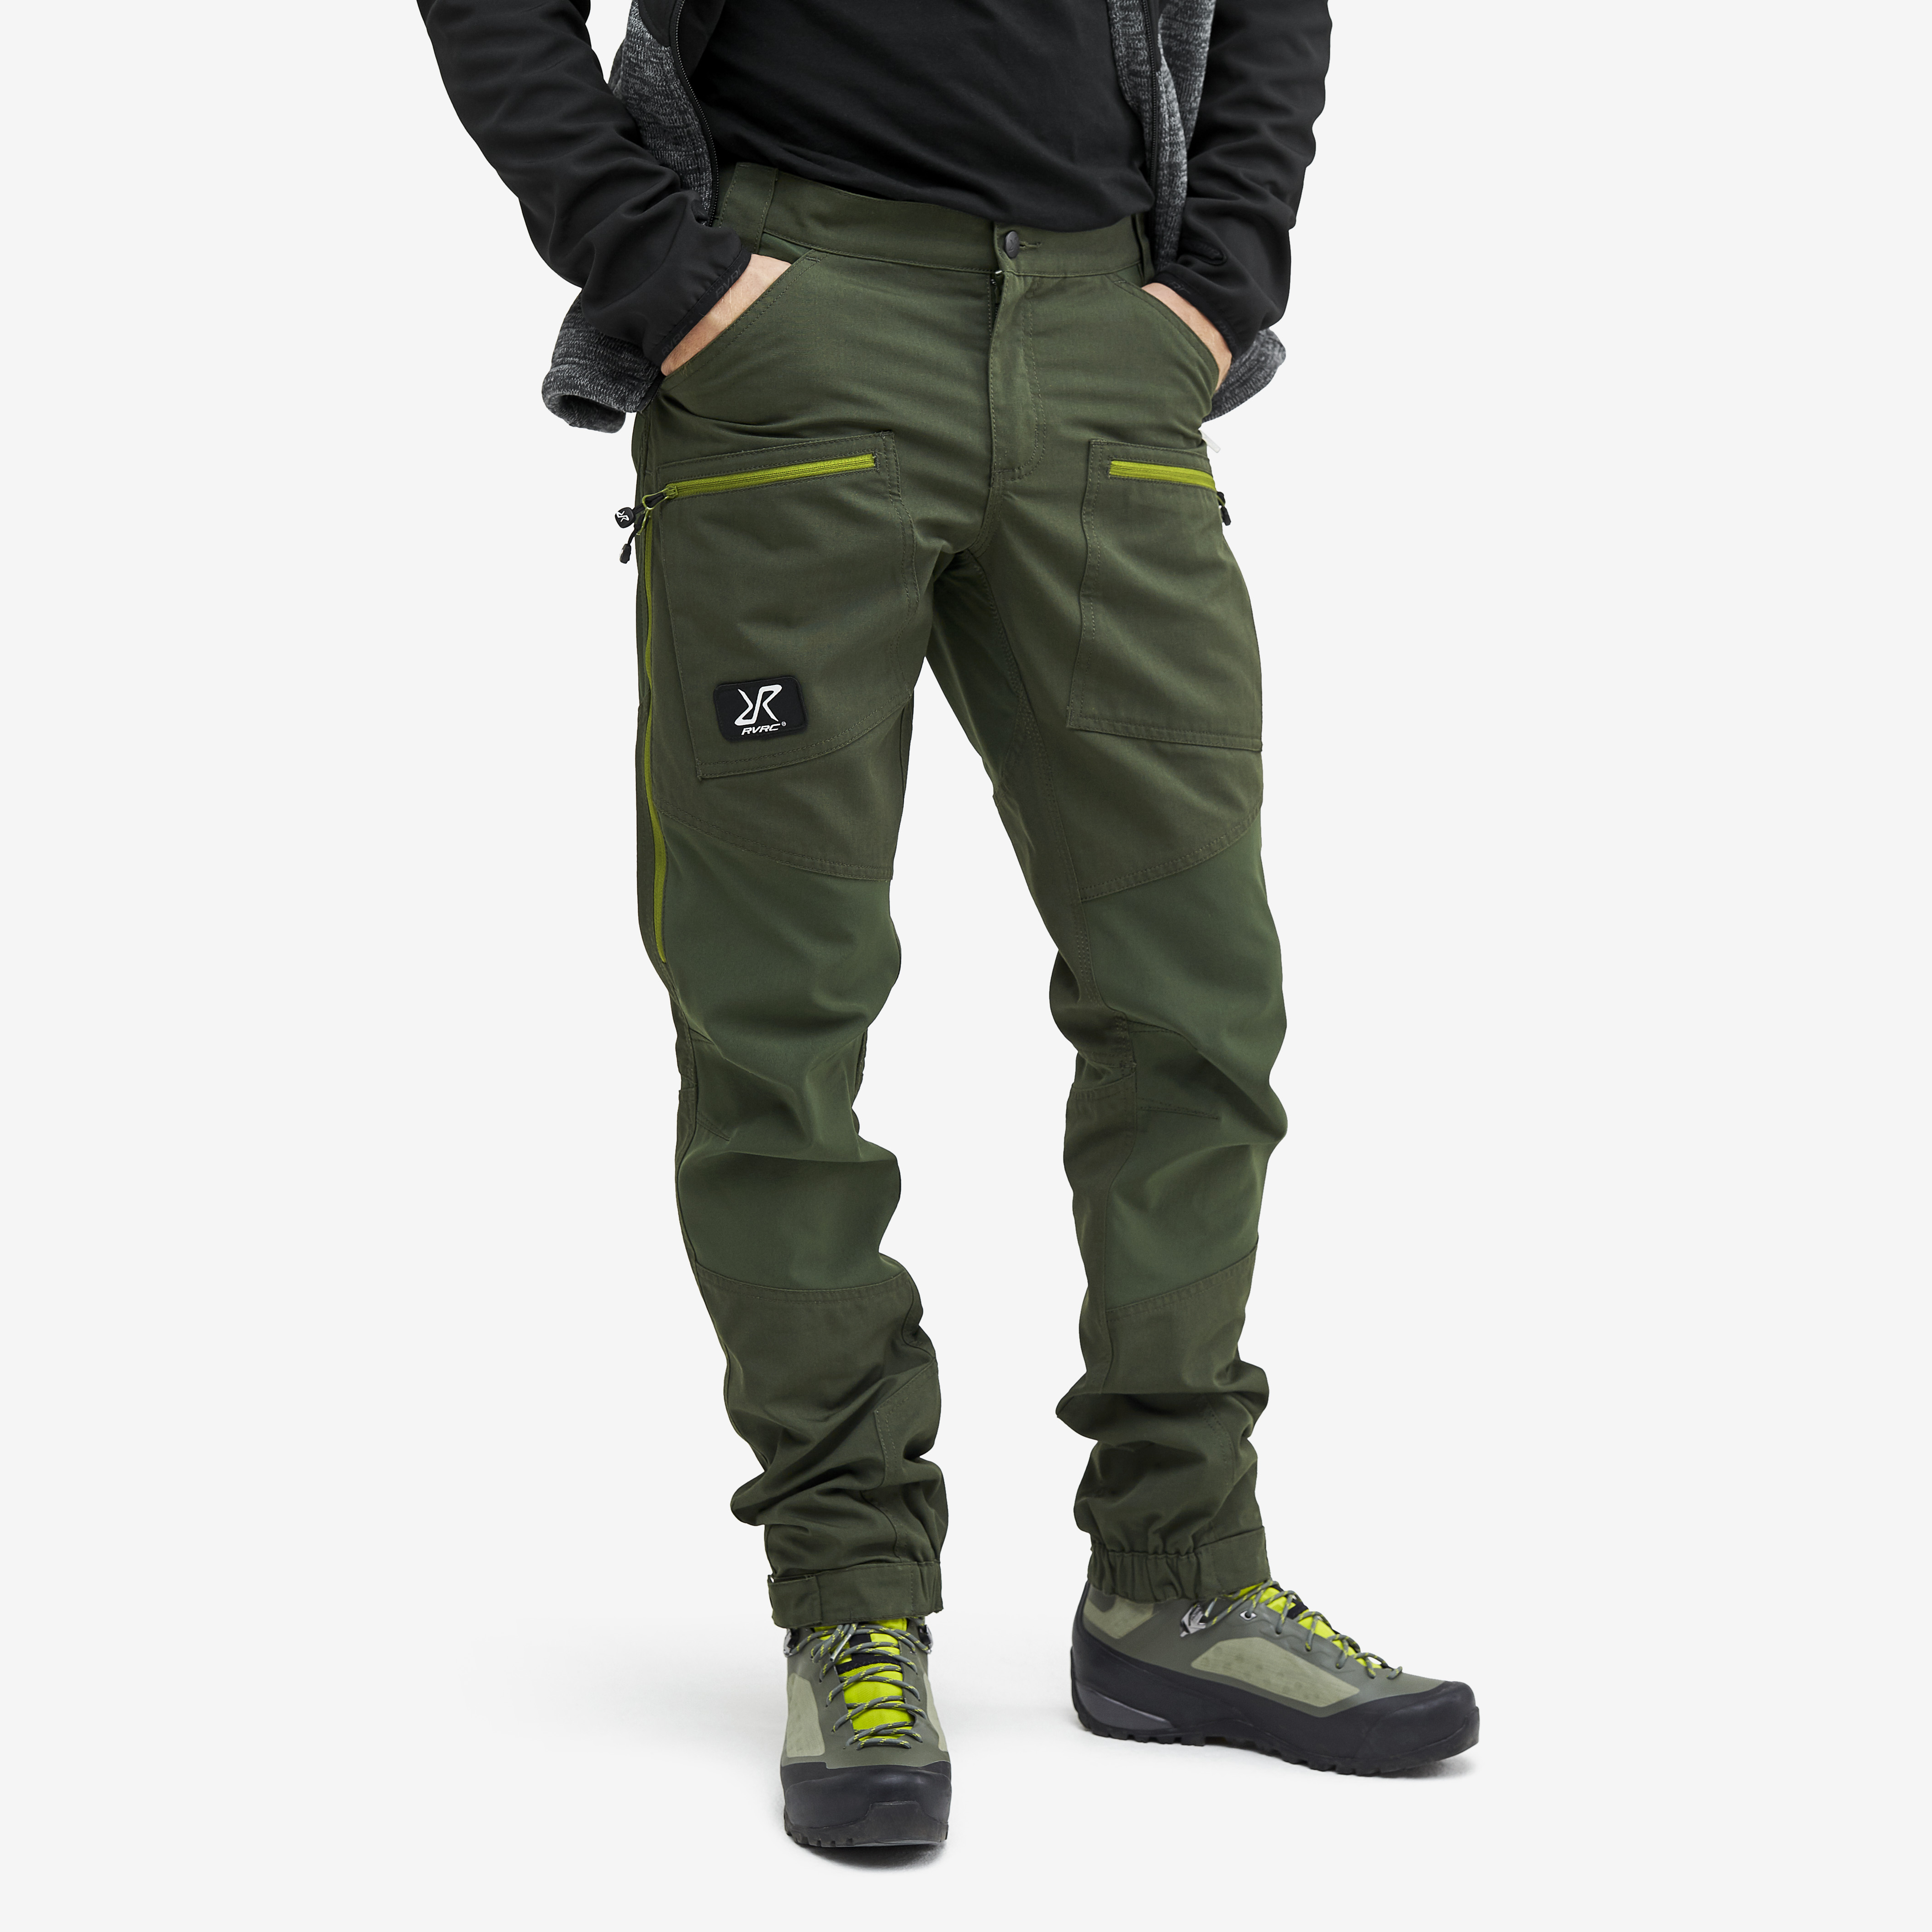 Nordwand Pro Pants Green Hombres